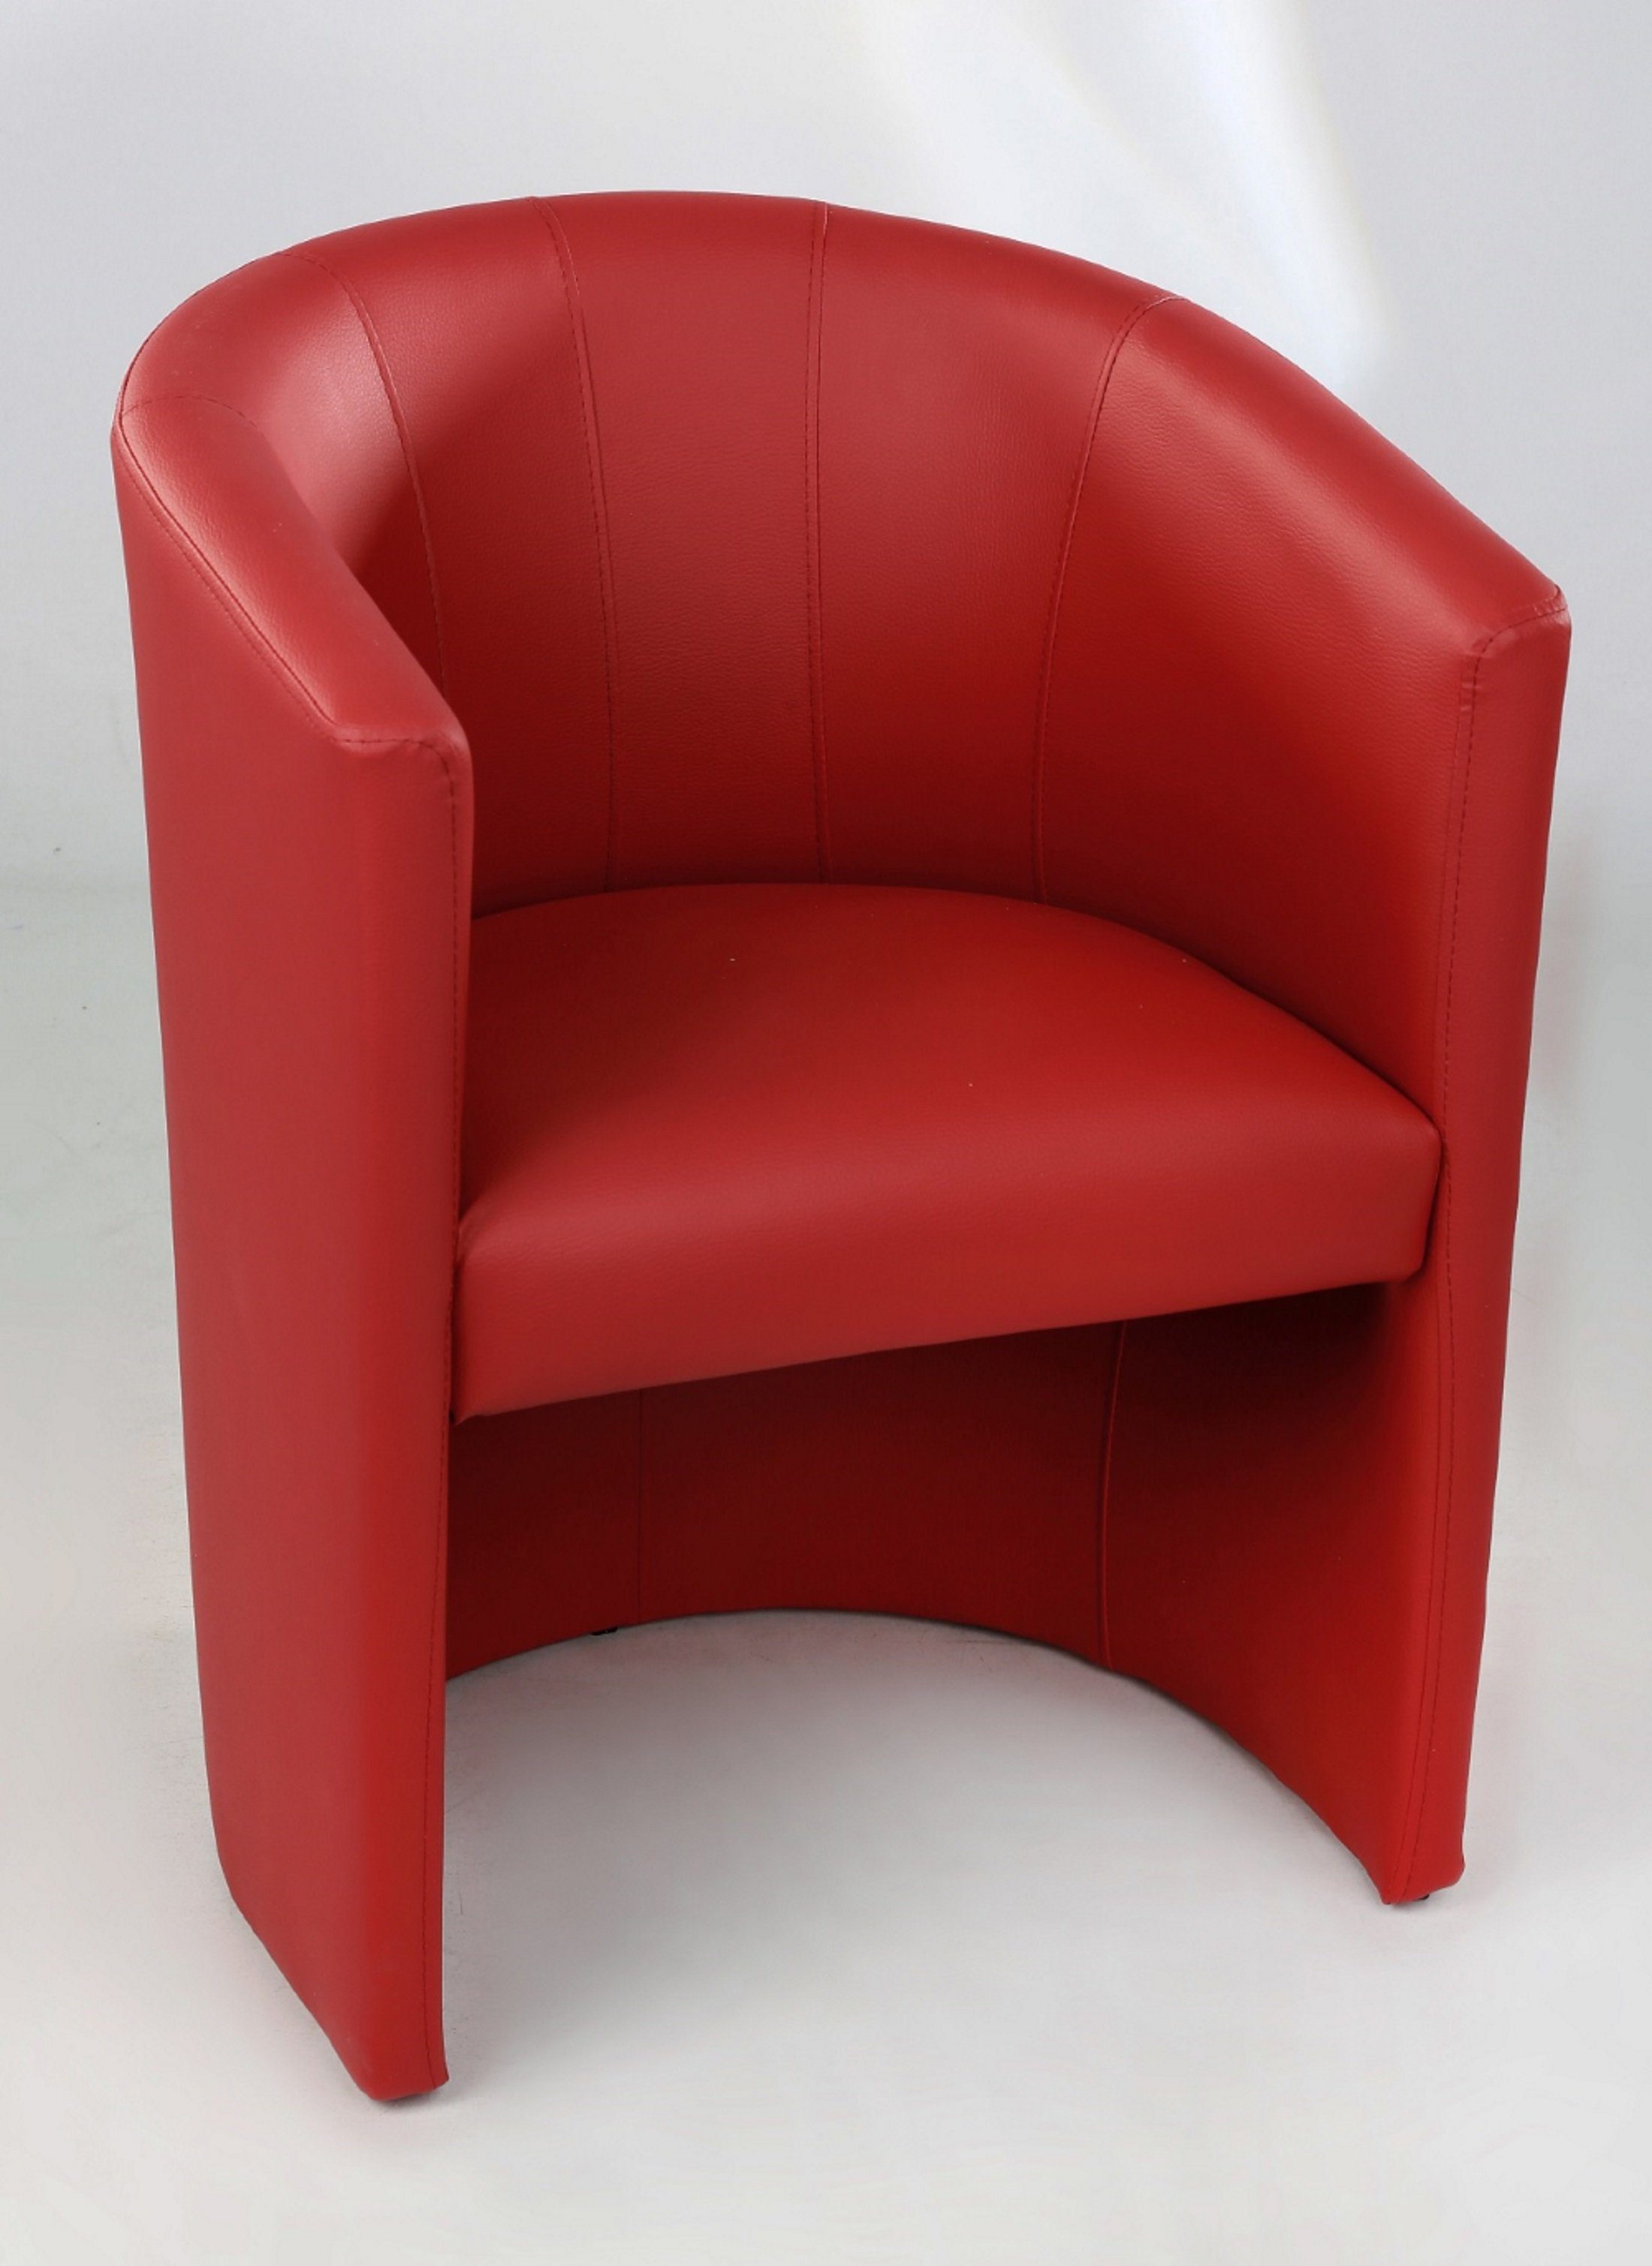 Kamil Cocktailsessel Design Sessel Clubsessel Loungesessel Club Möbel Farbe Rot